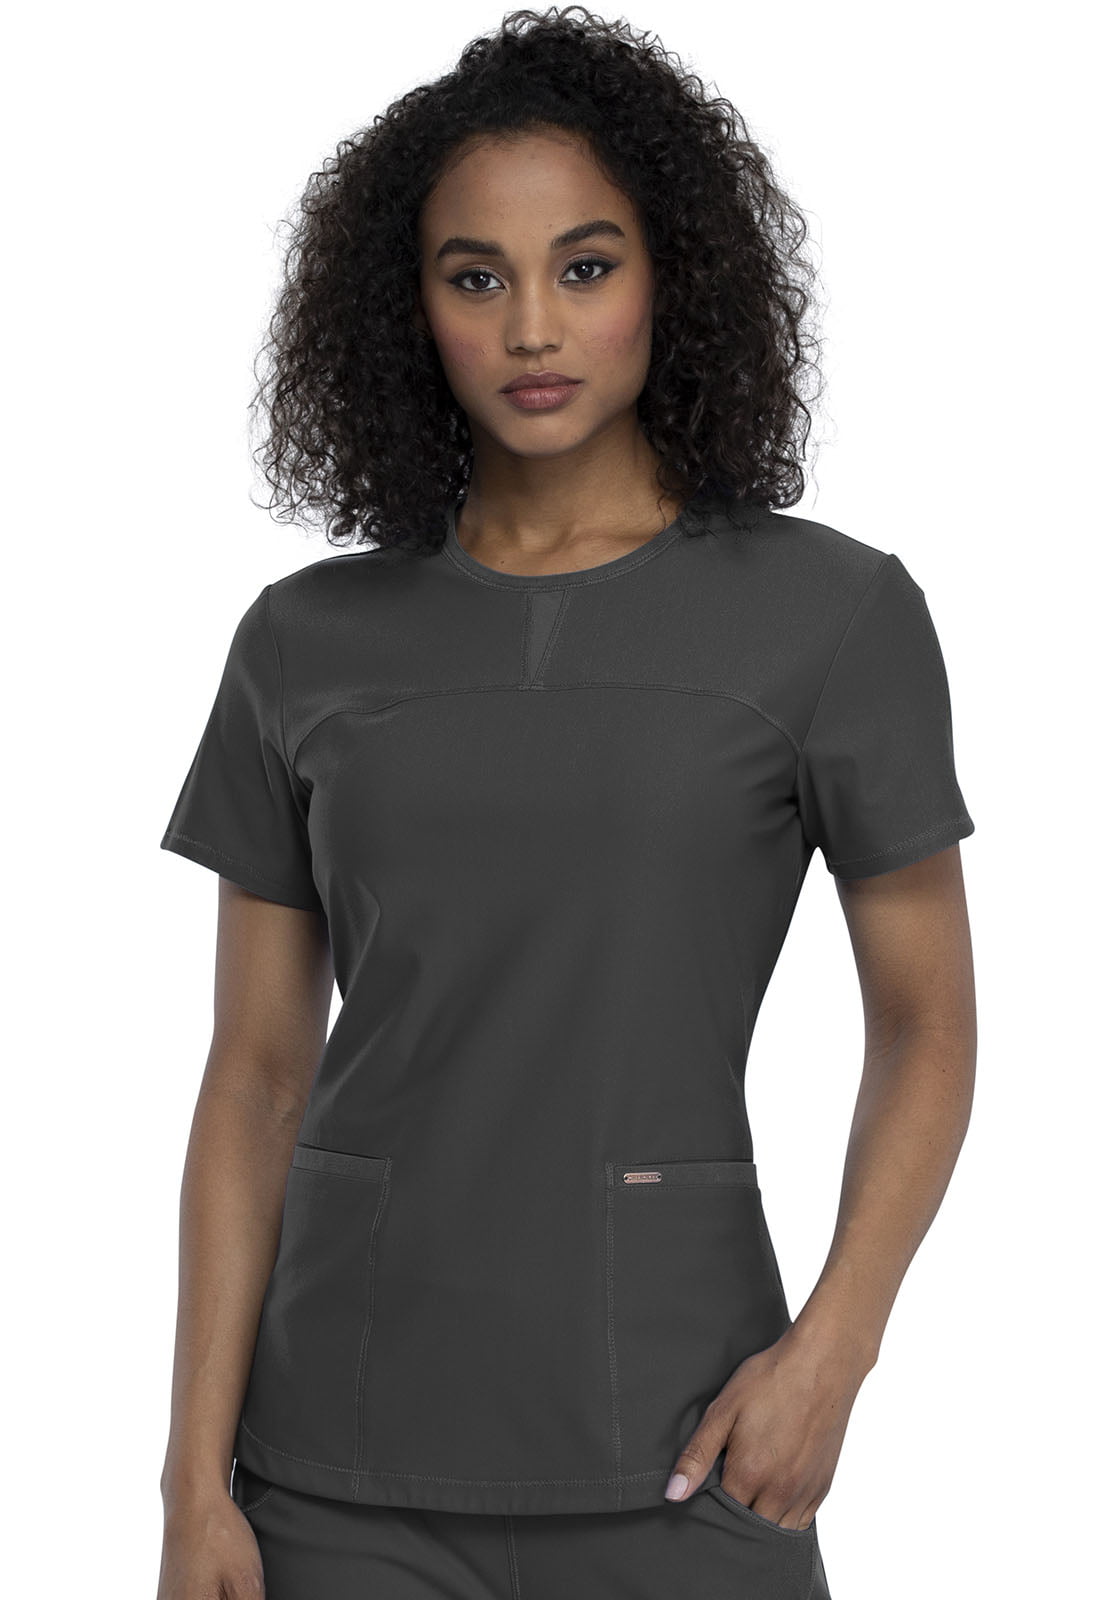 Details about   Pewter Cherokee Scrubs Workwear Revolution V Neck O.R Top WW657 PWT 